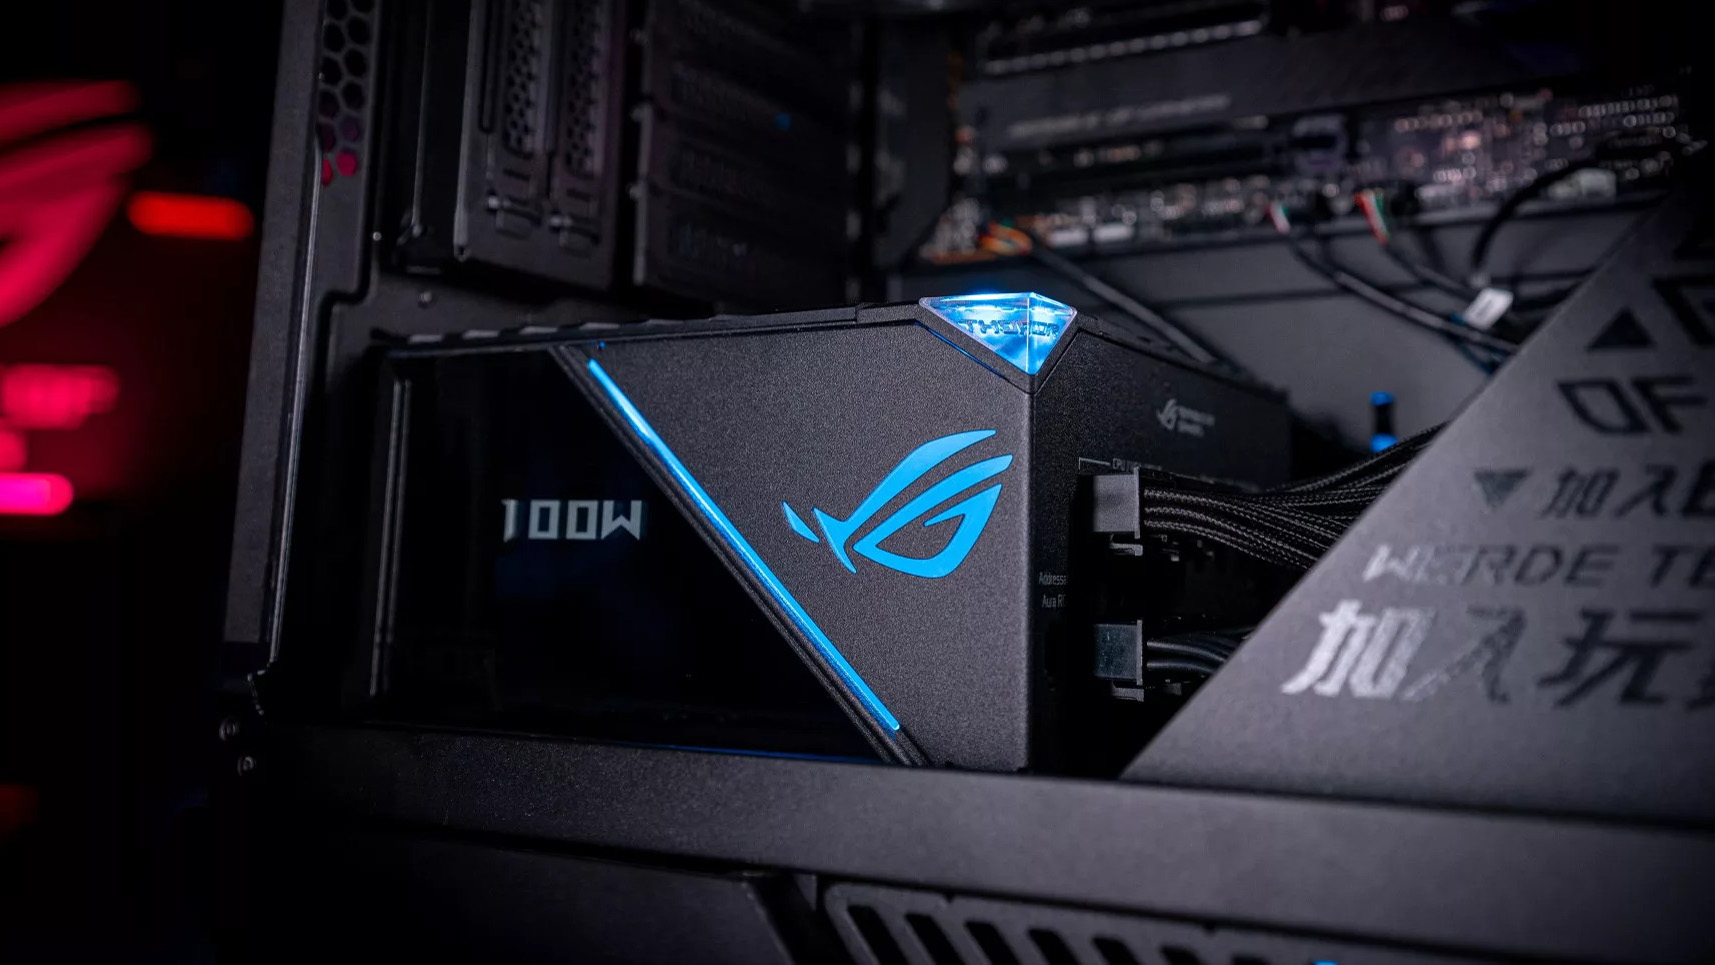 The ROG Thor power supply inside a desktop PC, showing 100W on the OLED display.